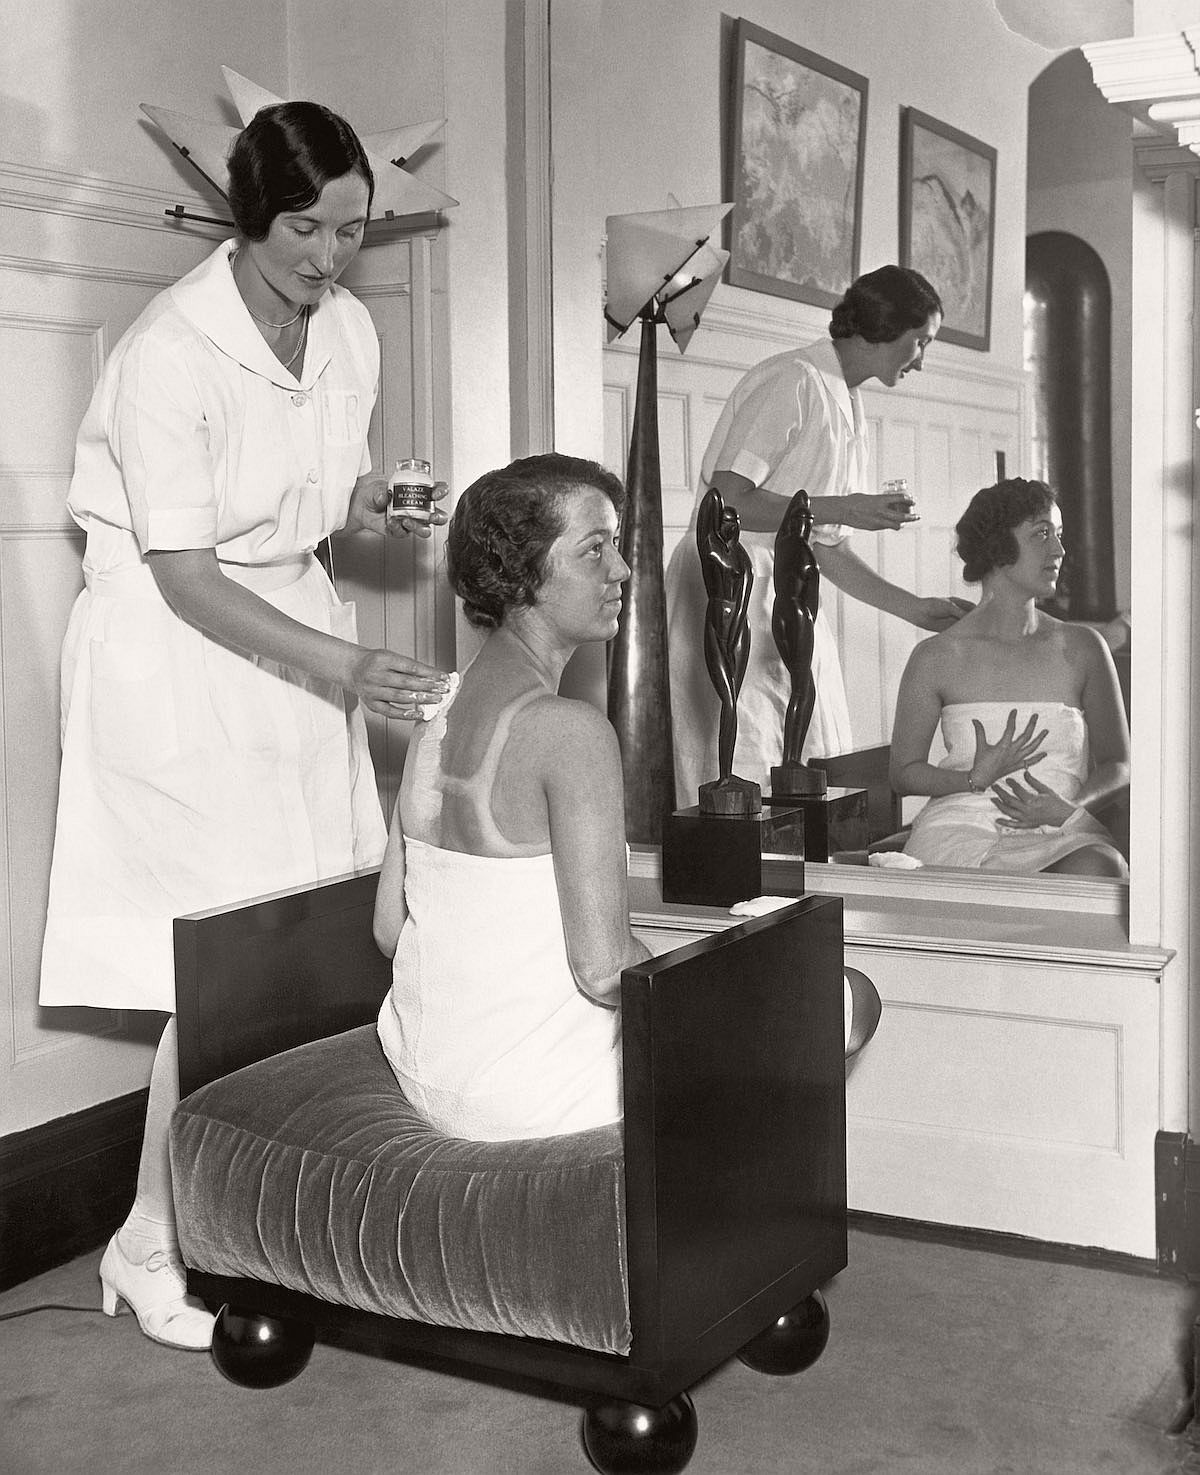 30 Sep 1929, Chicago, Illinois, USA --- In the fashionable Gold Coast salon of Helena Rubenstein, Carolyn Lang applies lotions to Billie Gloss' suntanned back, bleaching it down so that Miss Gloss will be the same pale shade all over. --- Image by © Underwood & Underwood/Corbis